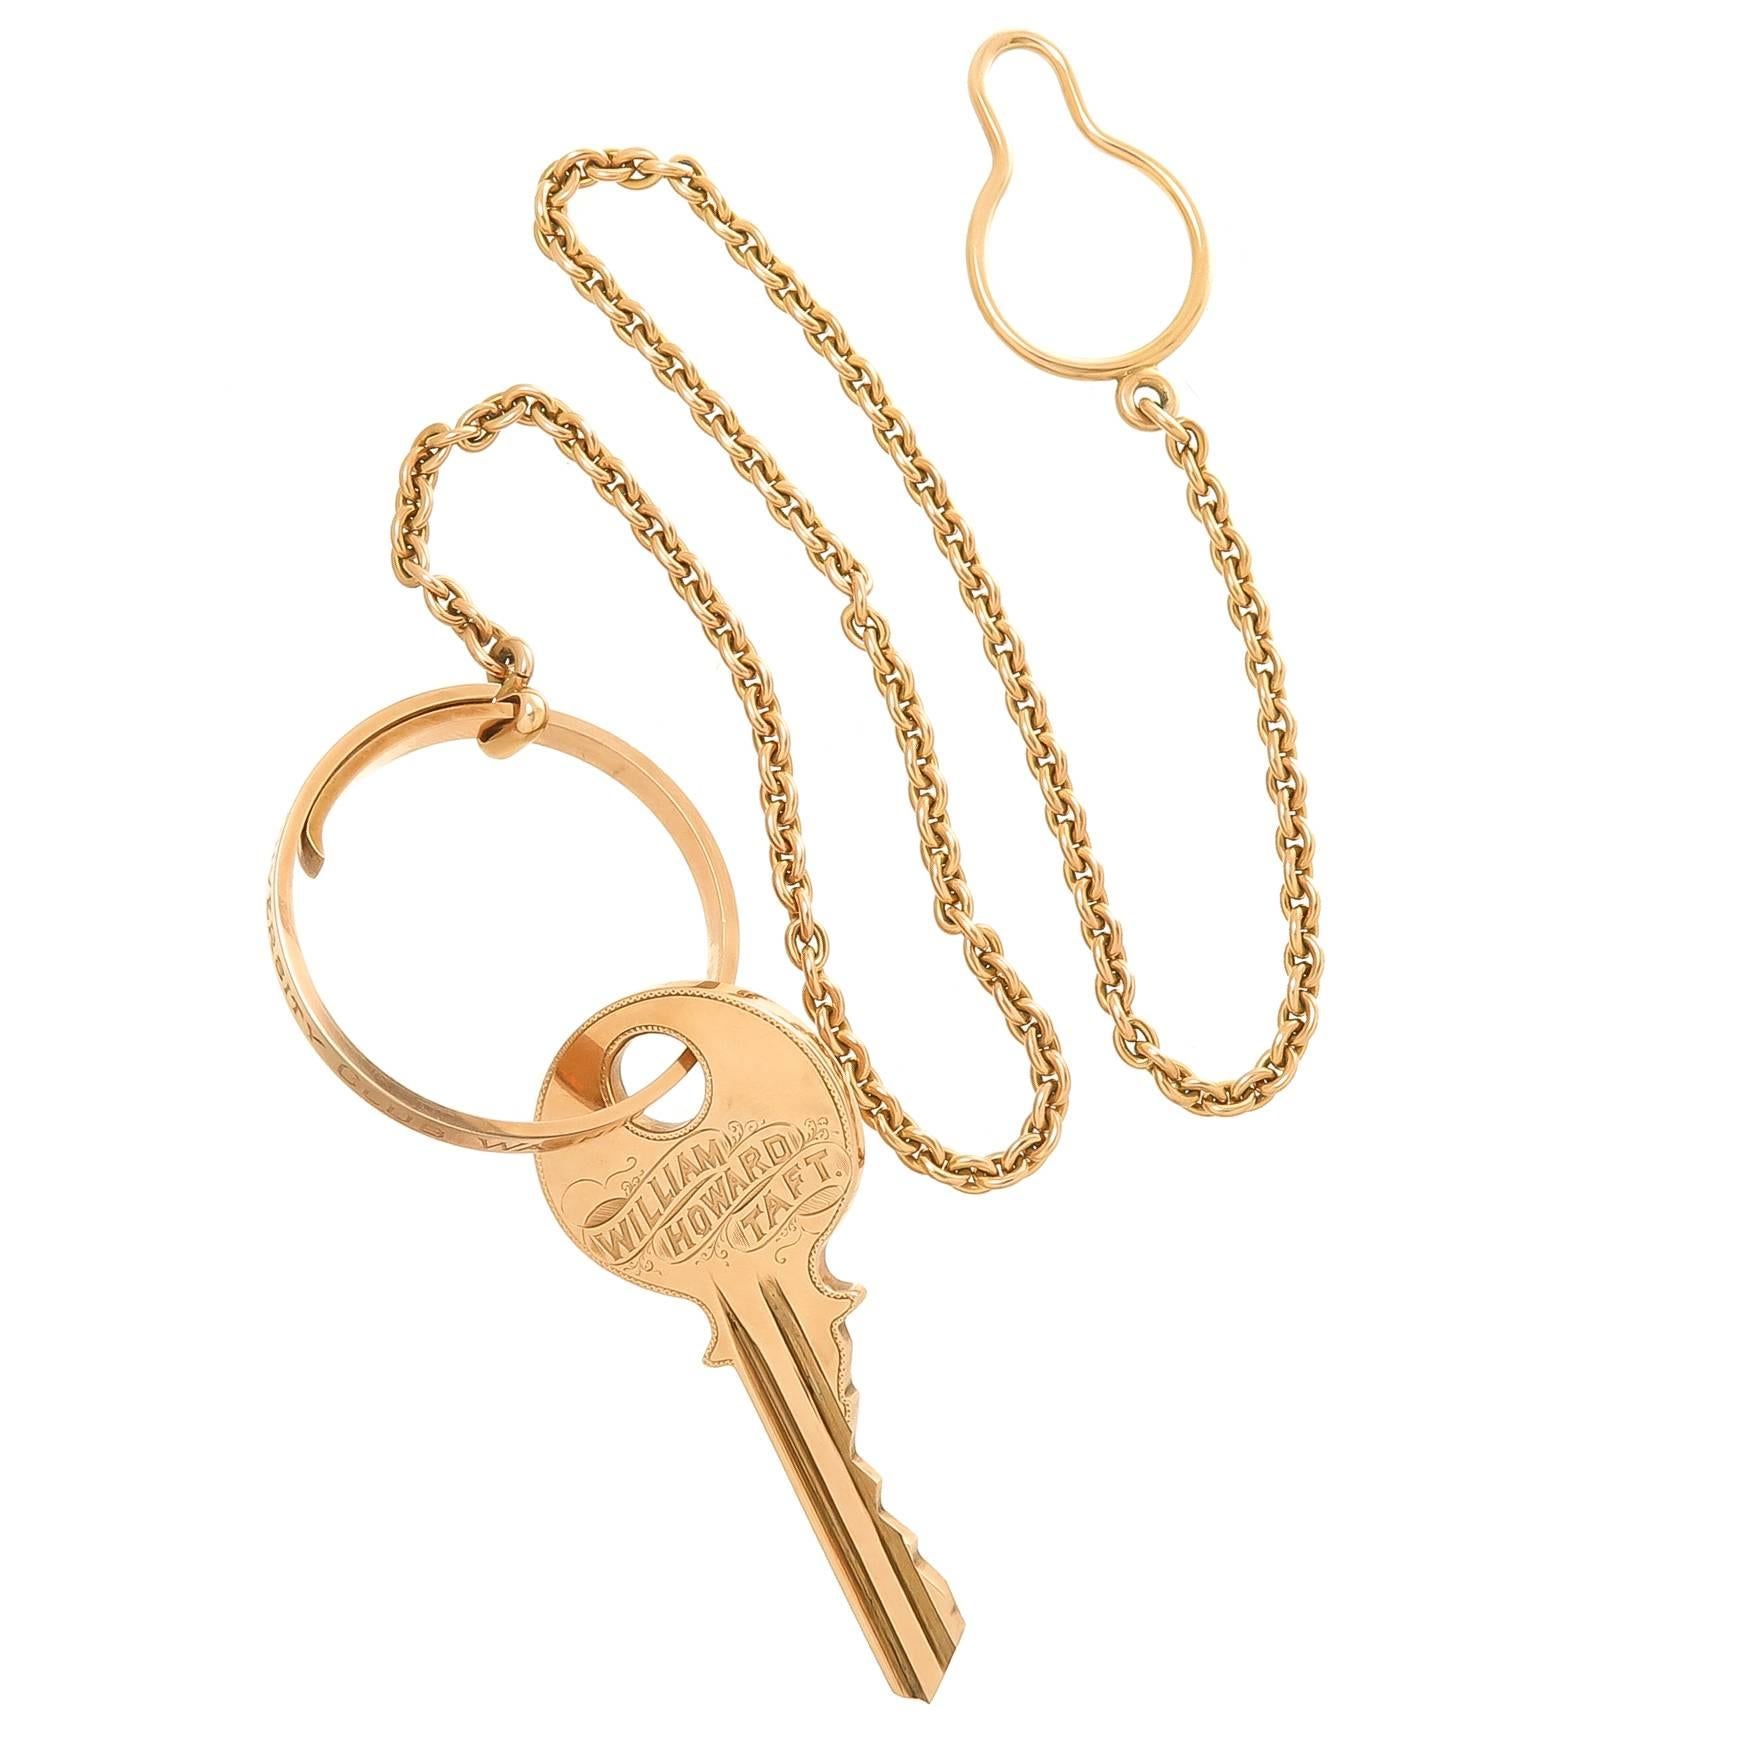 Circa 1913 Solid 14K Yellow Gold Presentation Key and chain from the University Club of Washington D.C. presented to President William Howard Taft, the historic Clubs membership includes a renowned who's who of American society and important